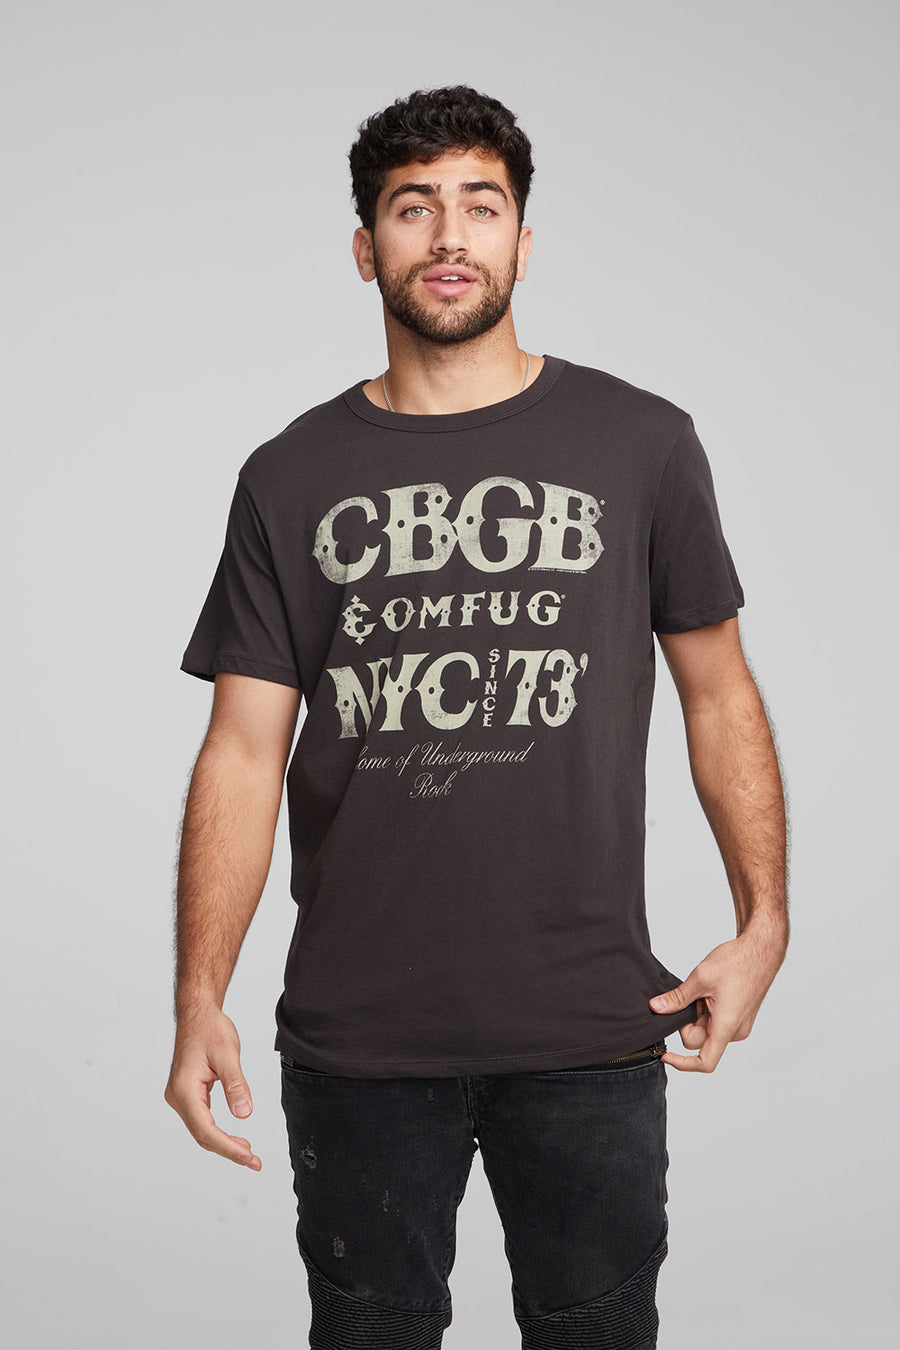 CBGB NYC Crew Neck Tee MENS chaserbrand